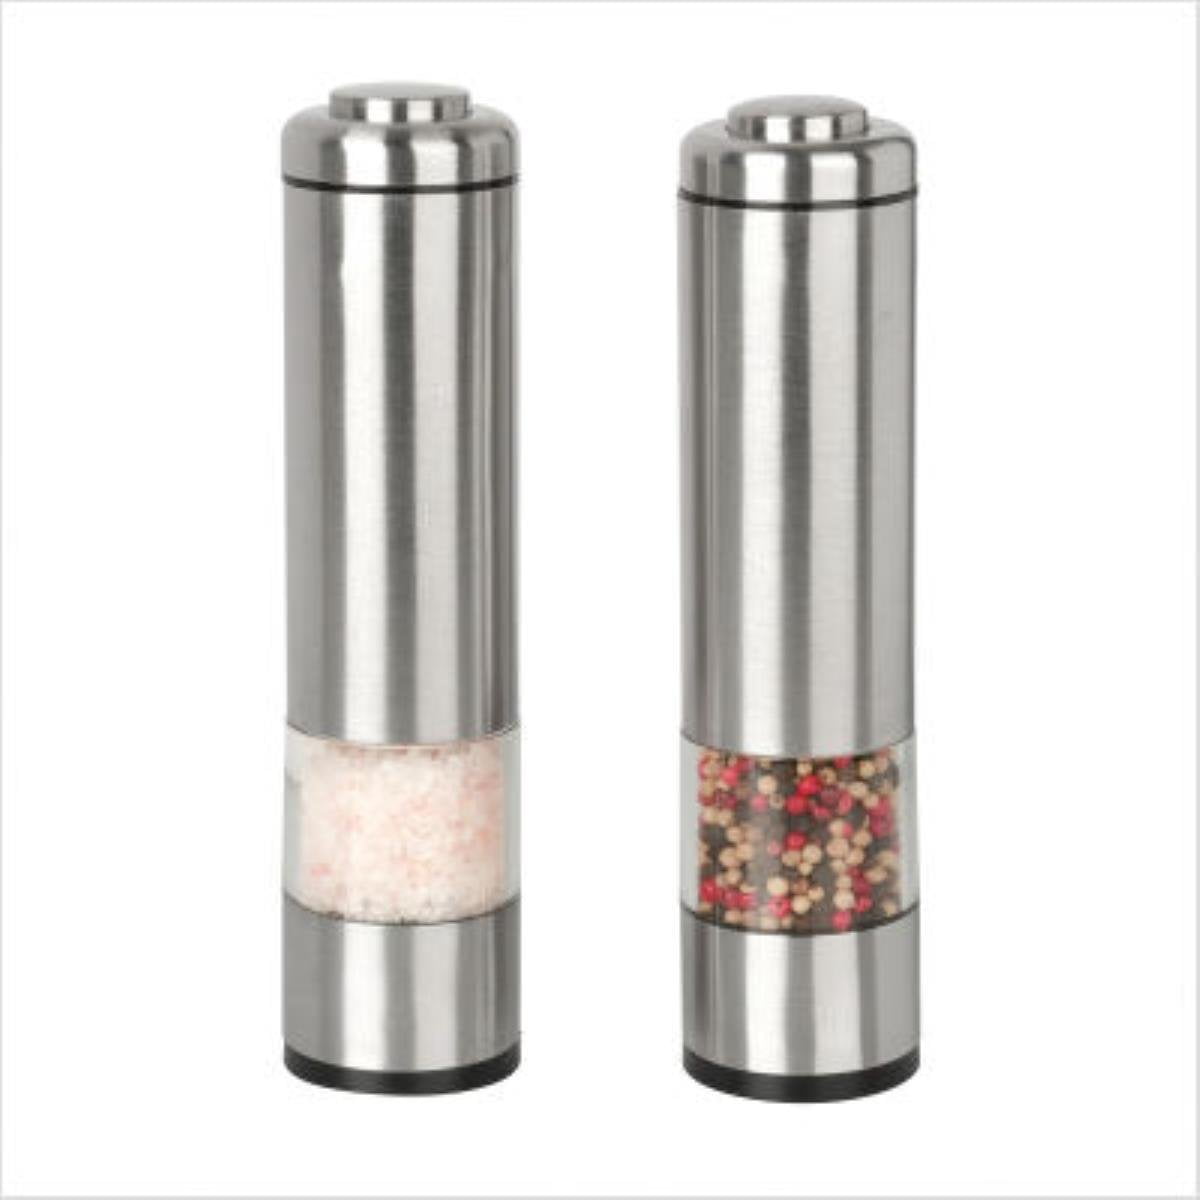 D Battery Salt and Pepper Shakers  Geeky kitchen, Stuffed peppers